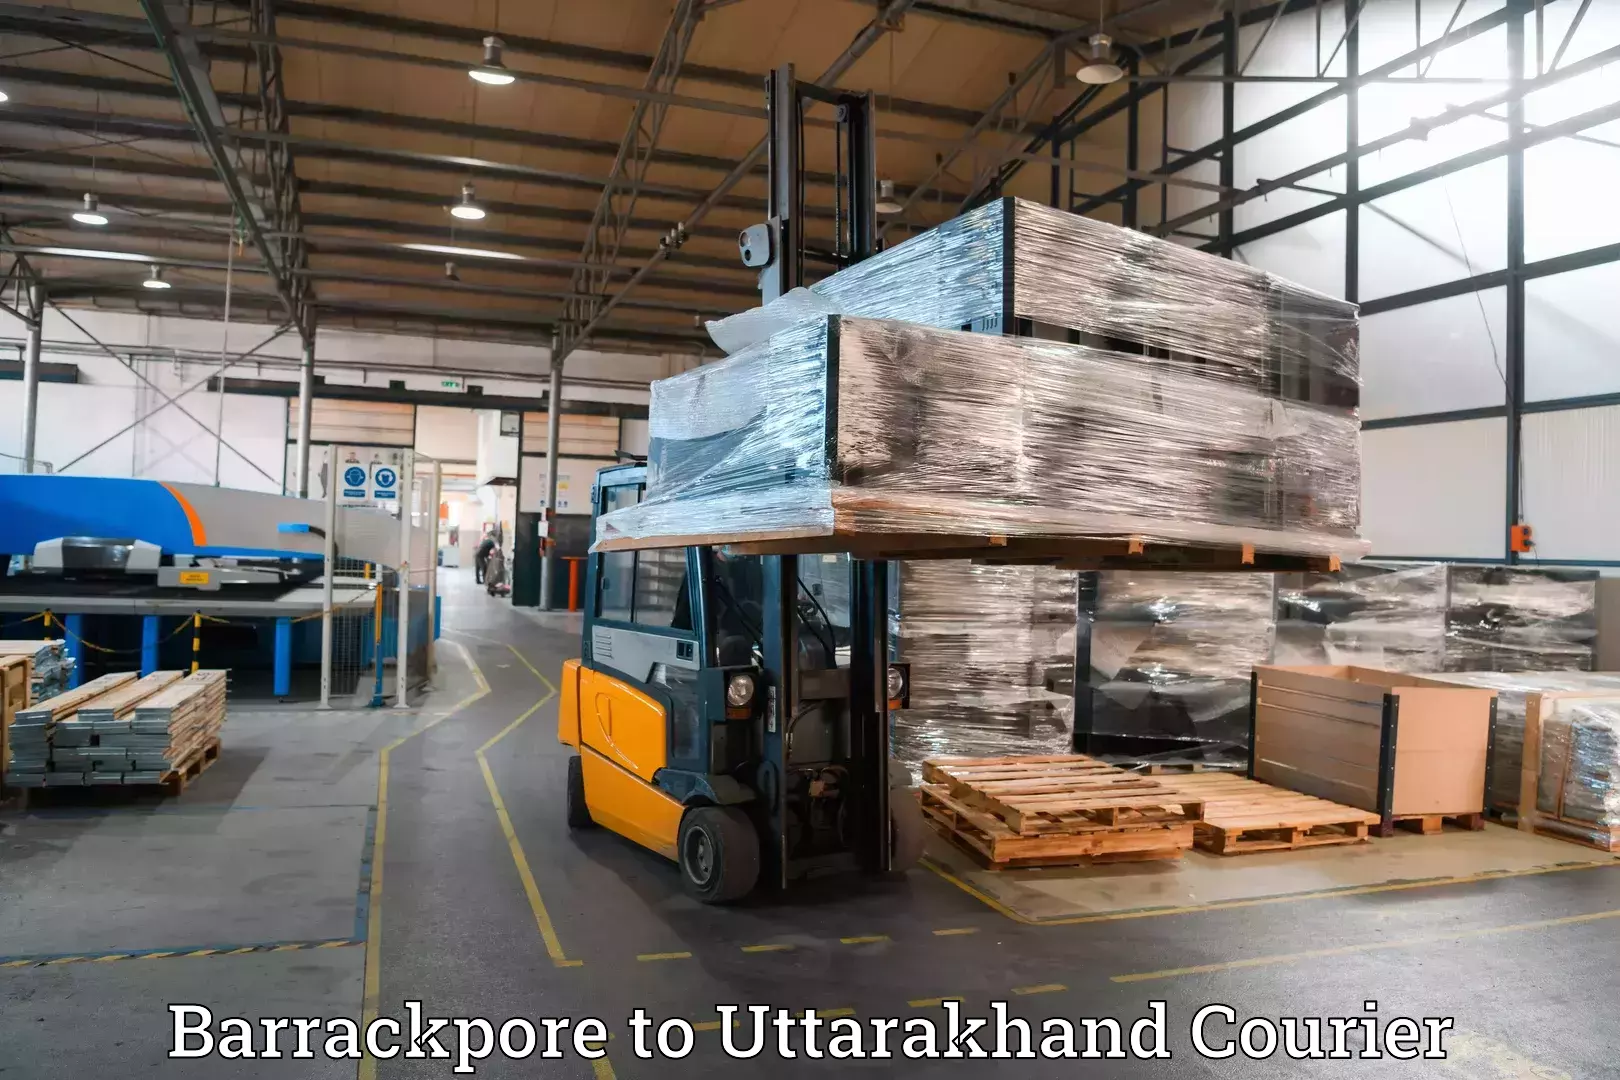 Baggage transport network in Barrackpore to Haridwar